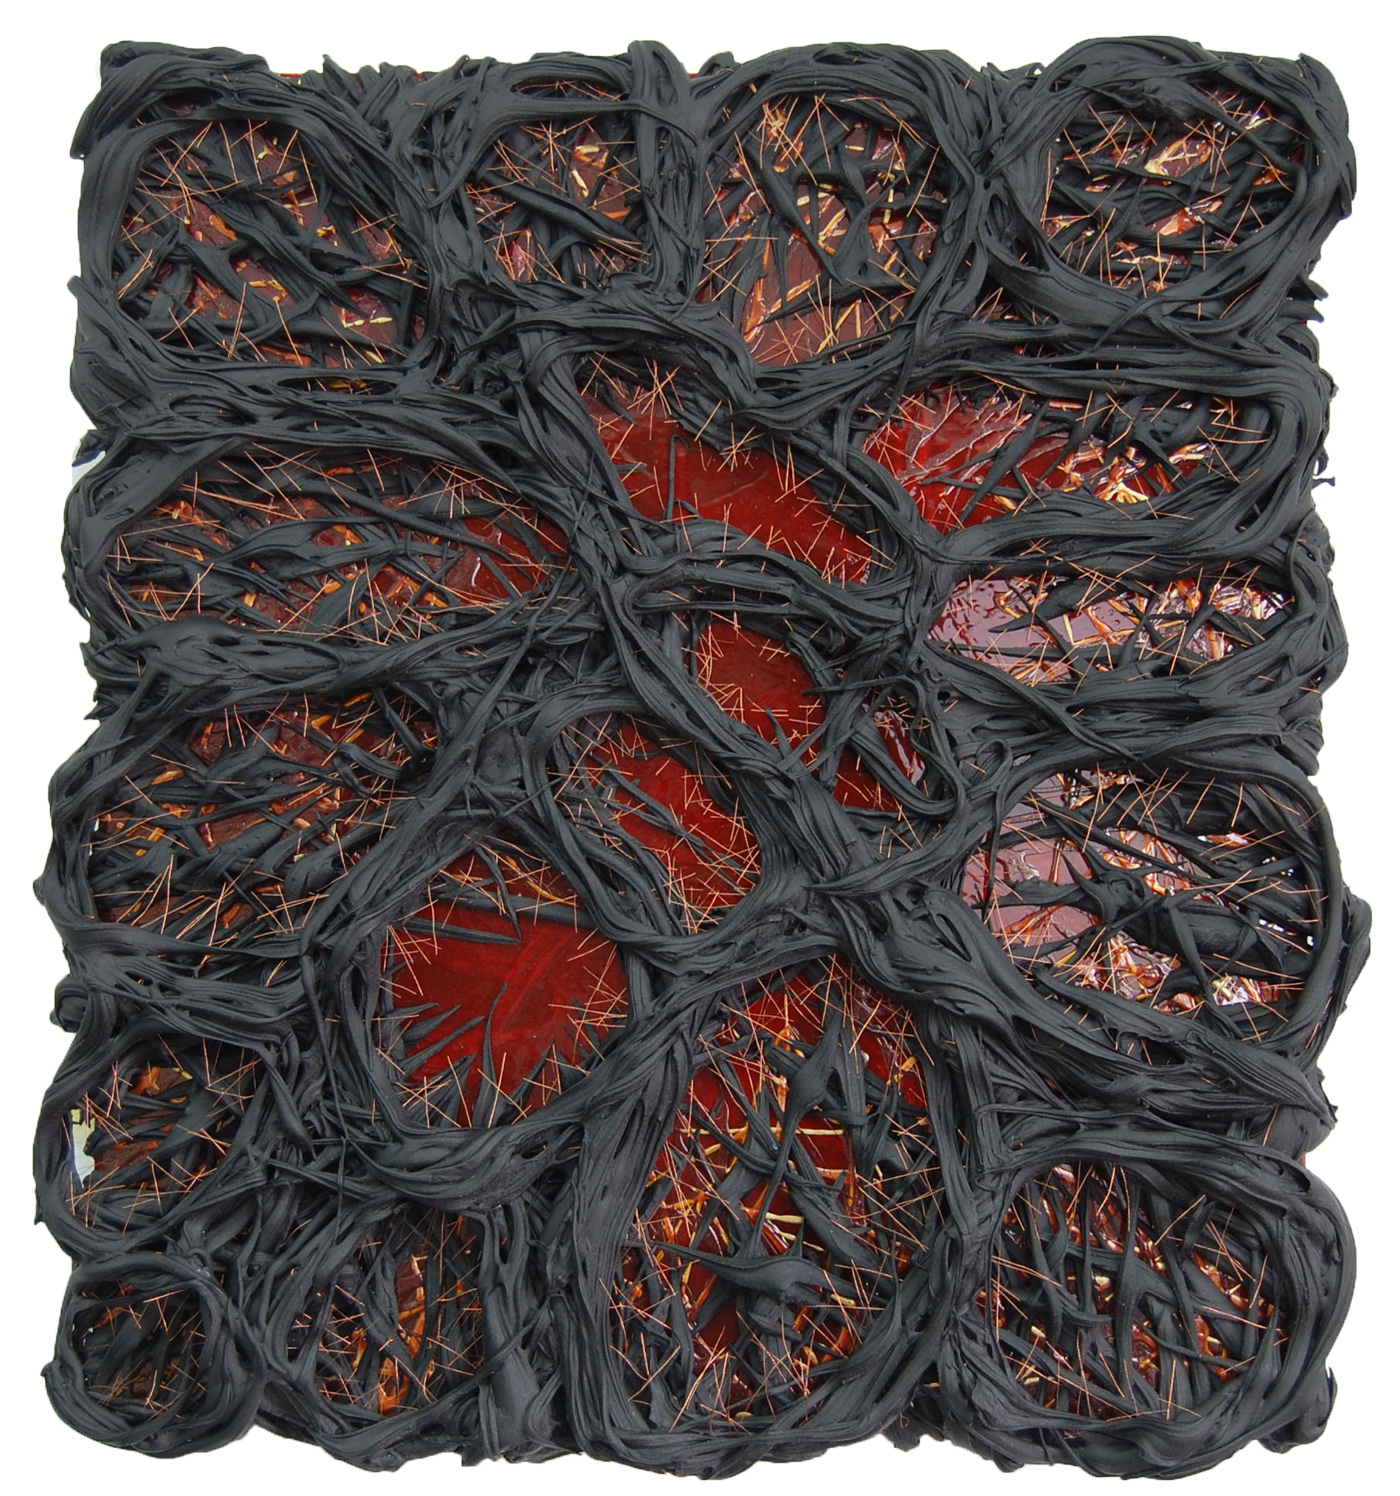 Thorny Crowns, 2010, Urethane, pigment dispersions, Ultralight, and wire on panel